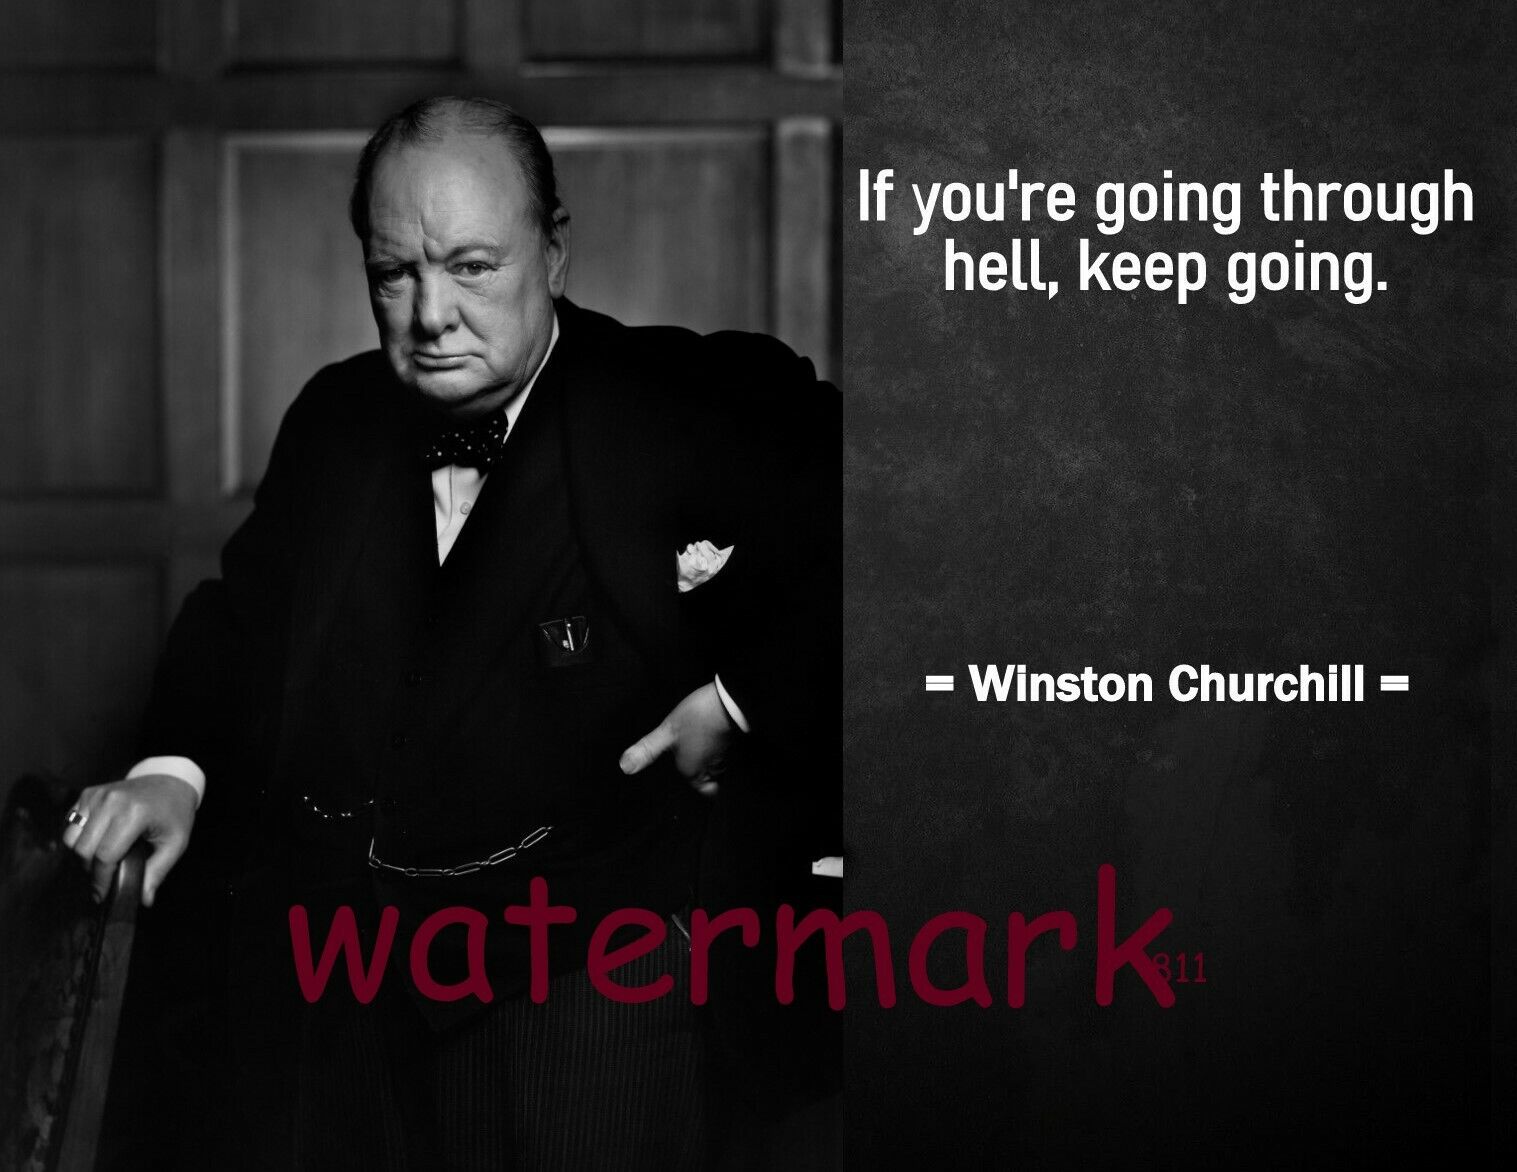 WINSTON CHURCHILL FAMOUS QUOTE PHOTO PRINT IF YOUR GOING THROUGH HELL KEEP GOING